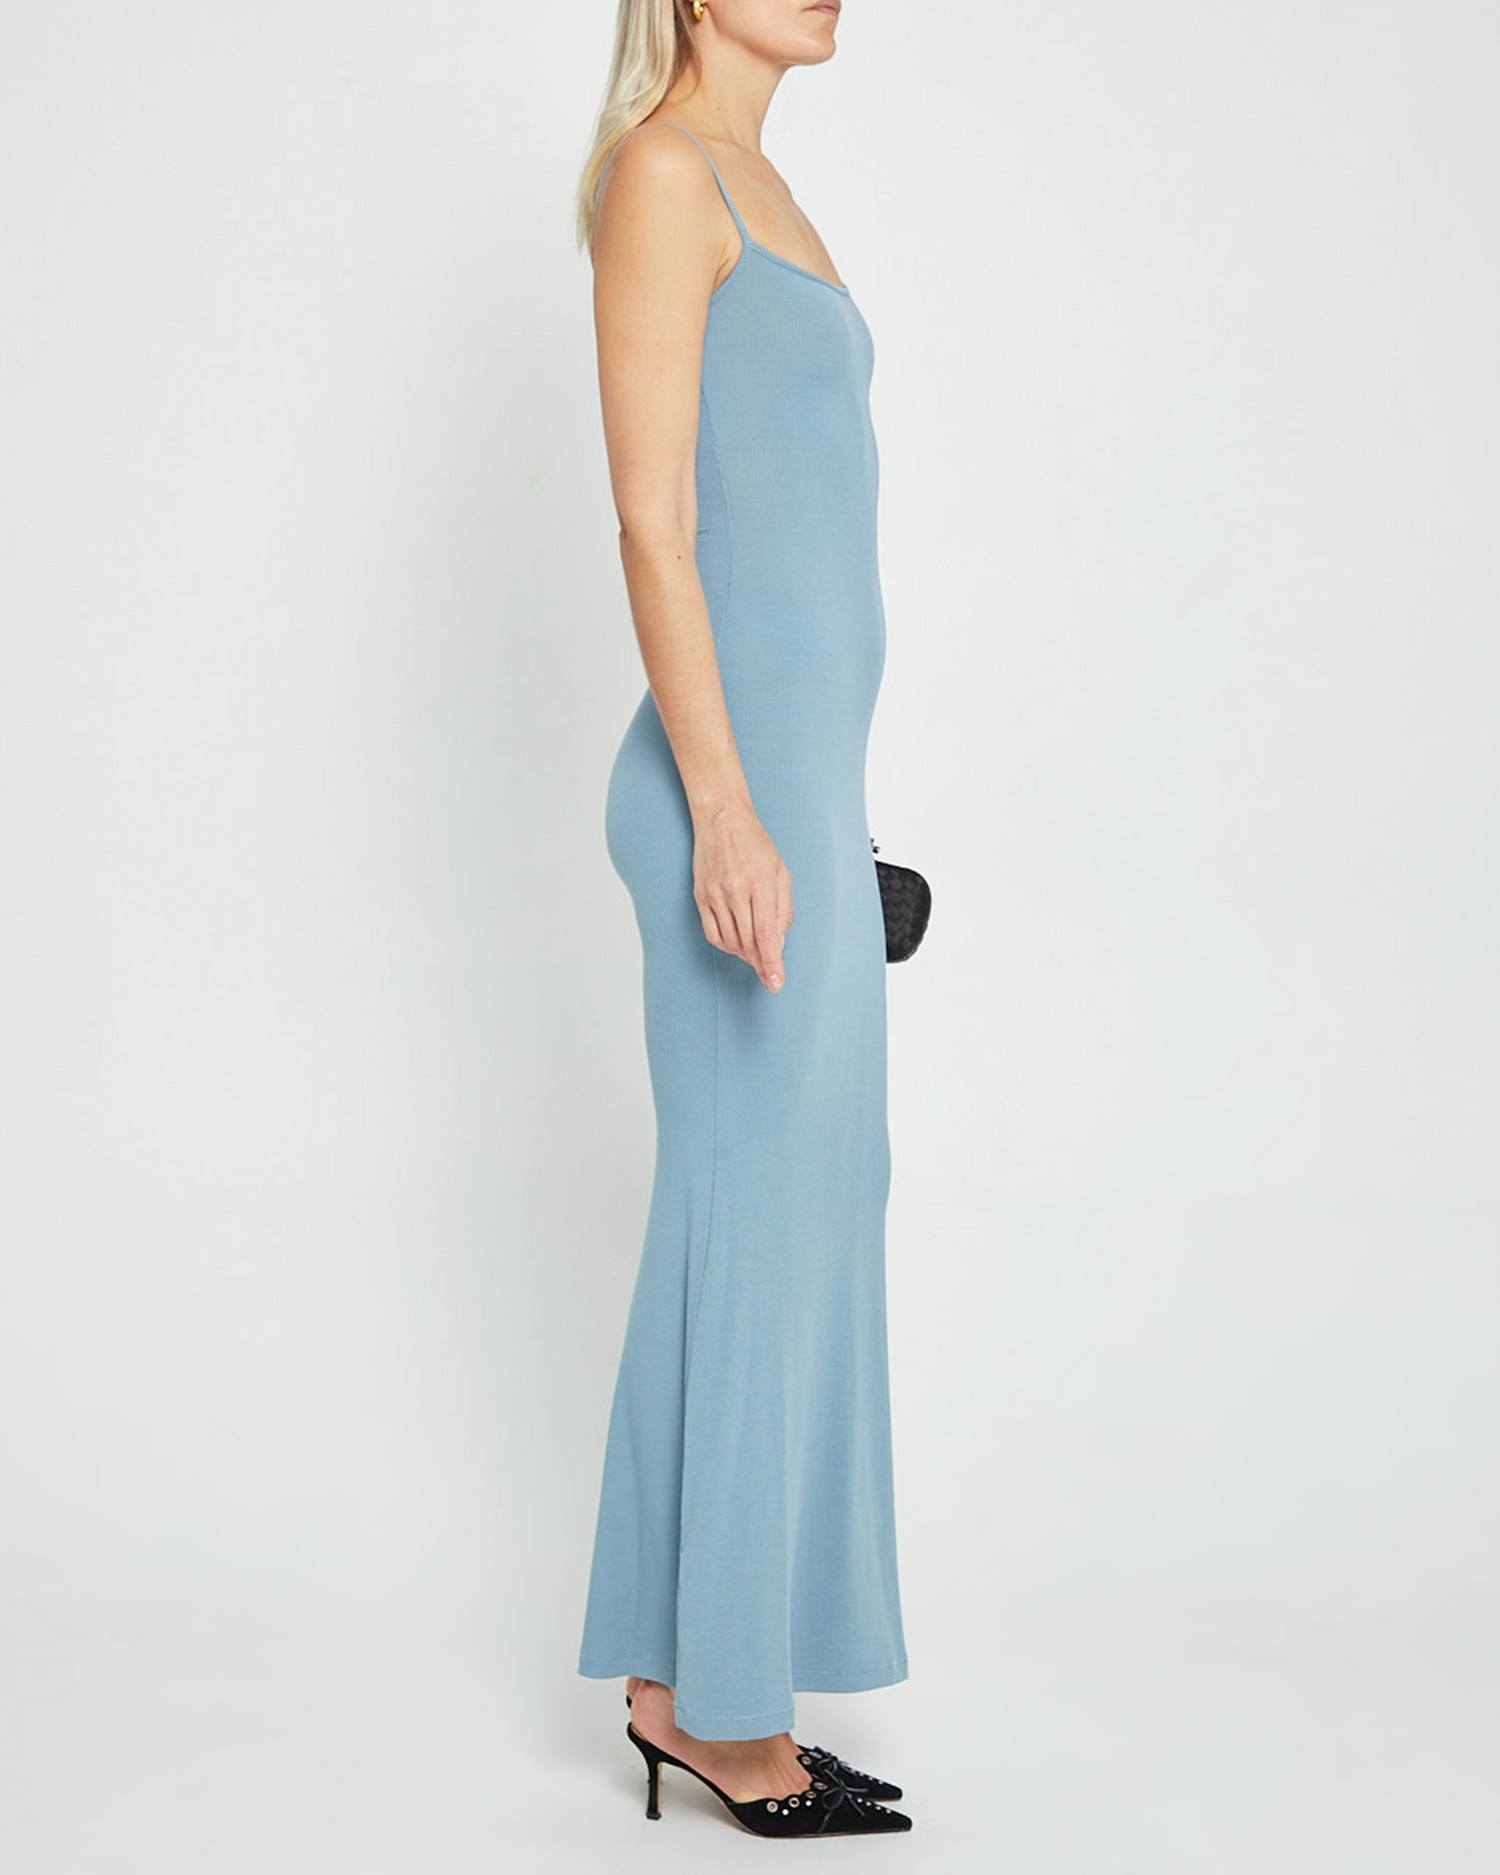 The Soft Lounge Long Slip Dress is coming back. We repeat: It's